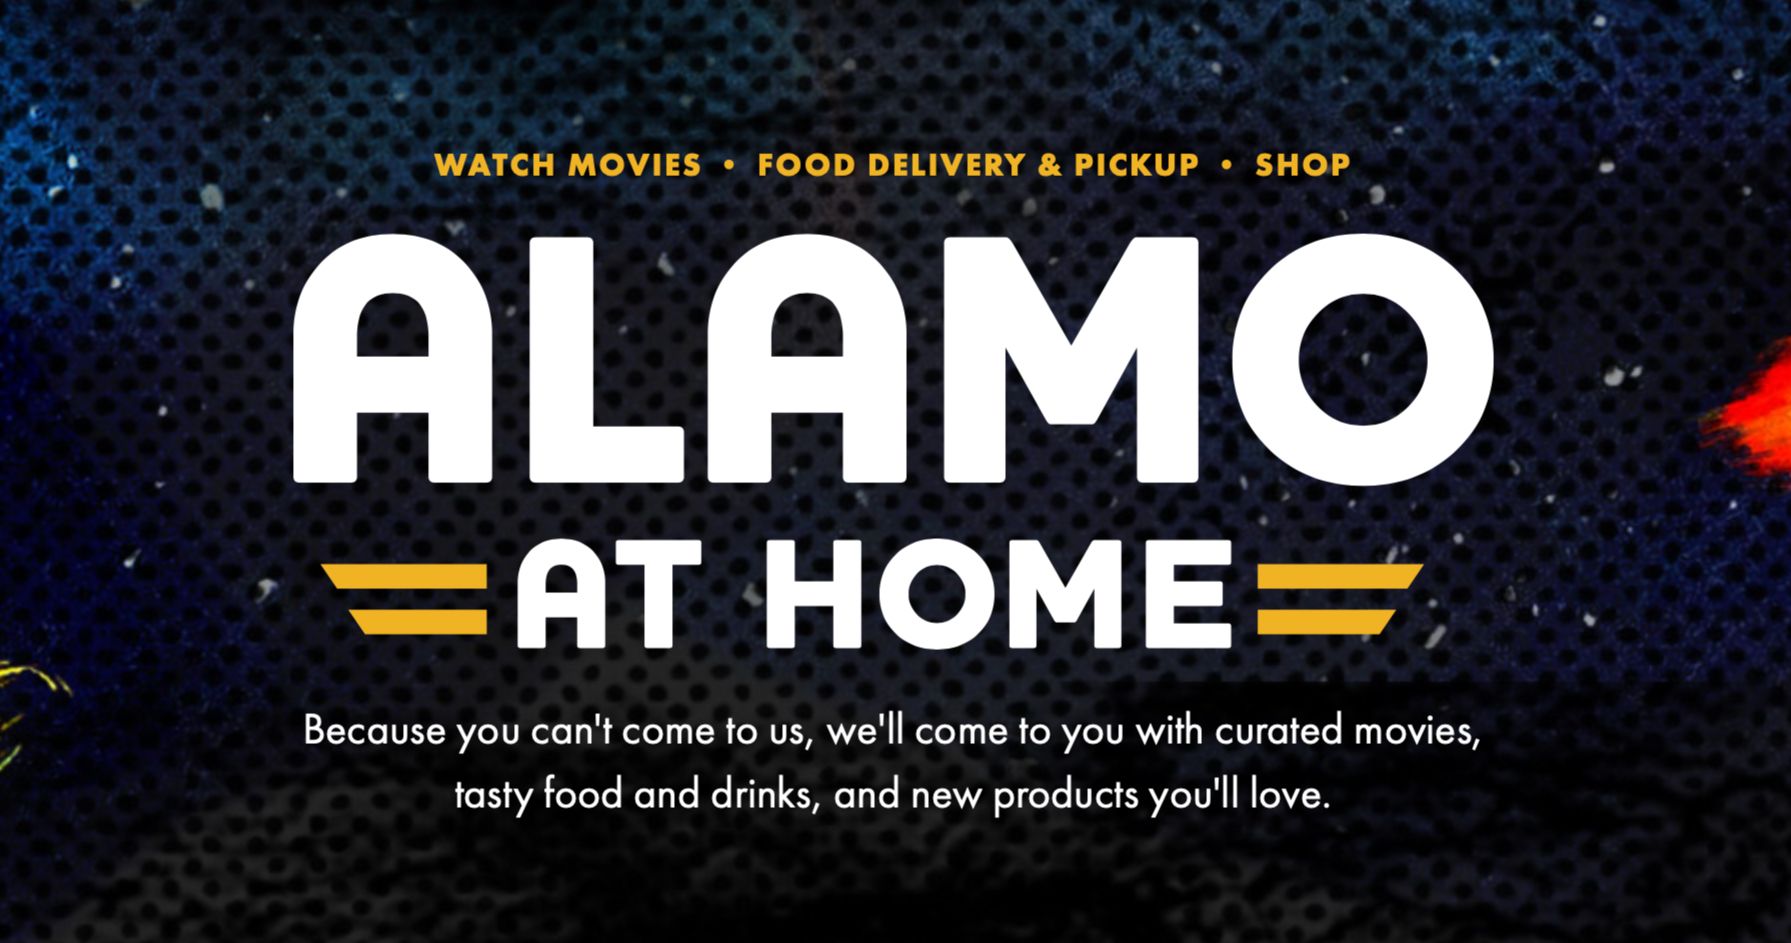 Alamo Drafthouse Now Offers Curbside Pickup for Food, Cocktails, Beer and More